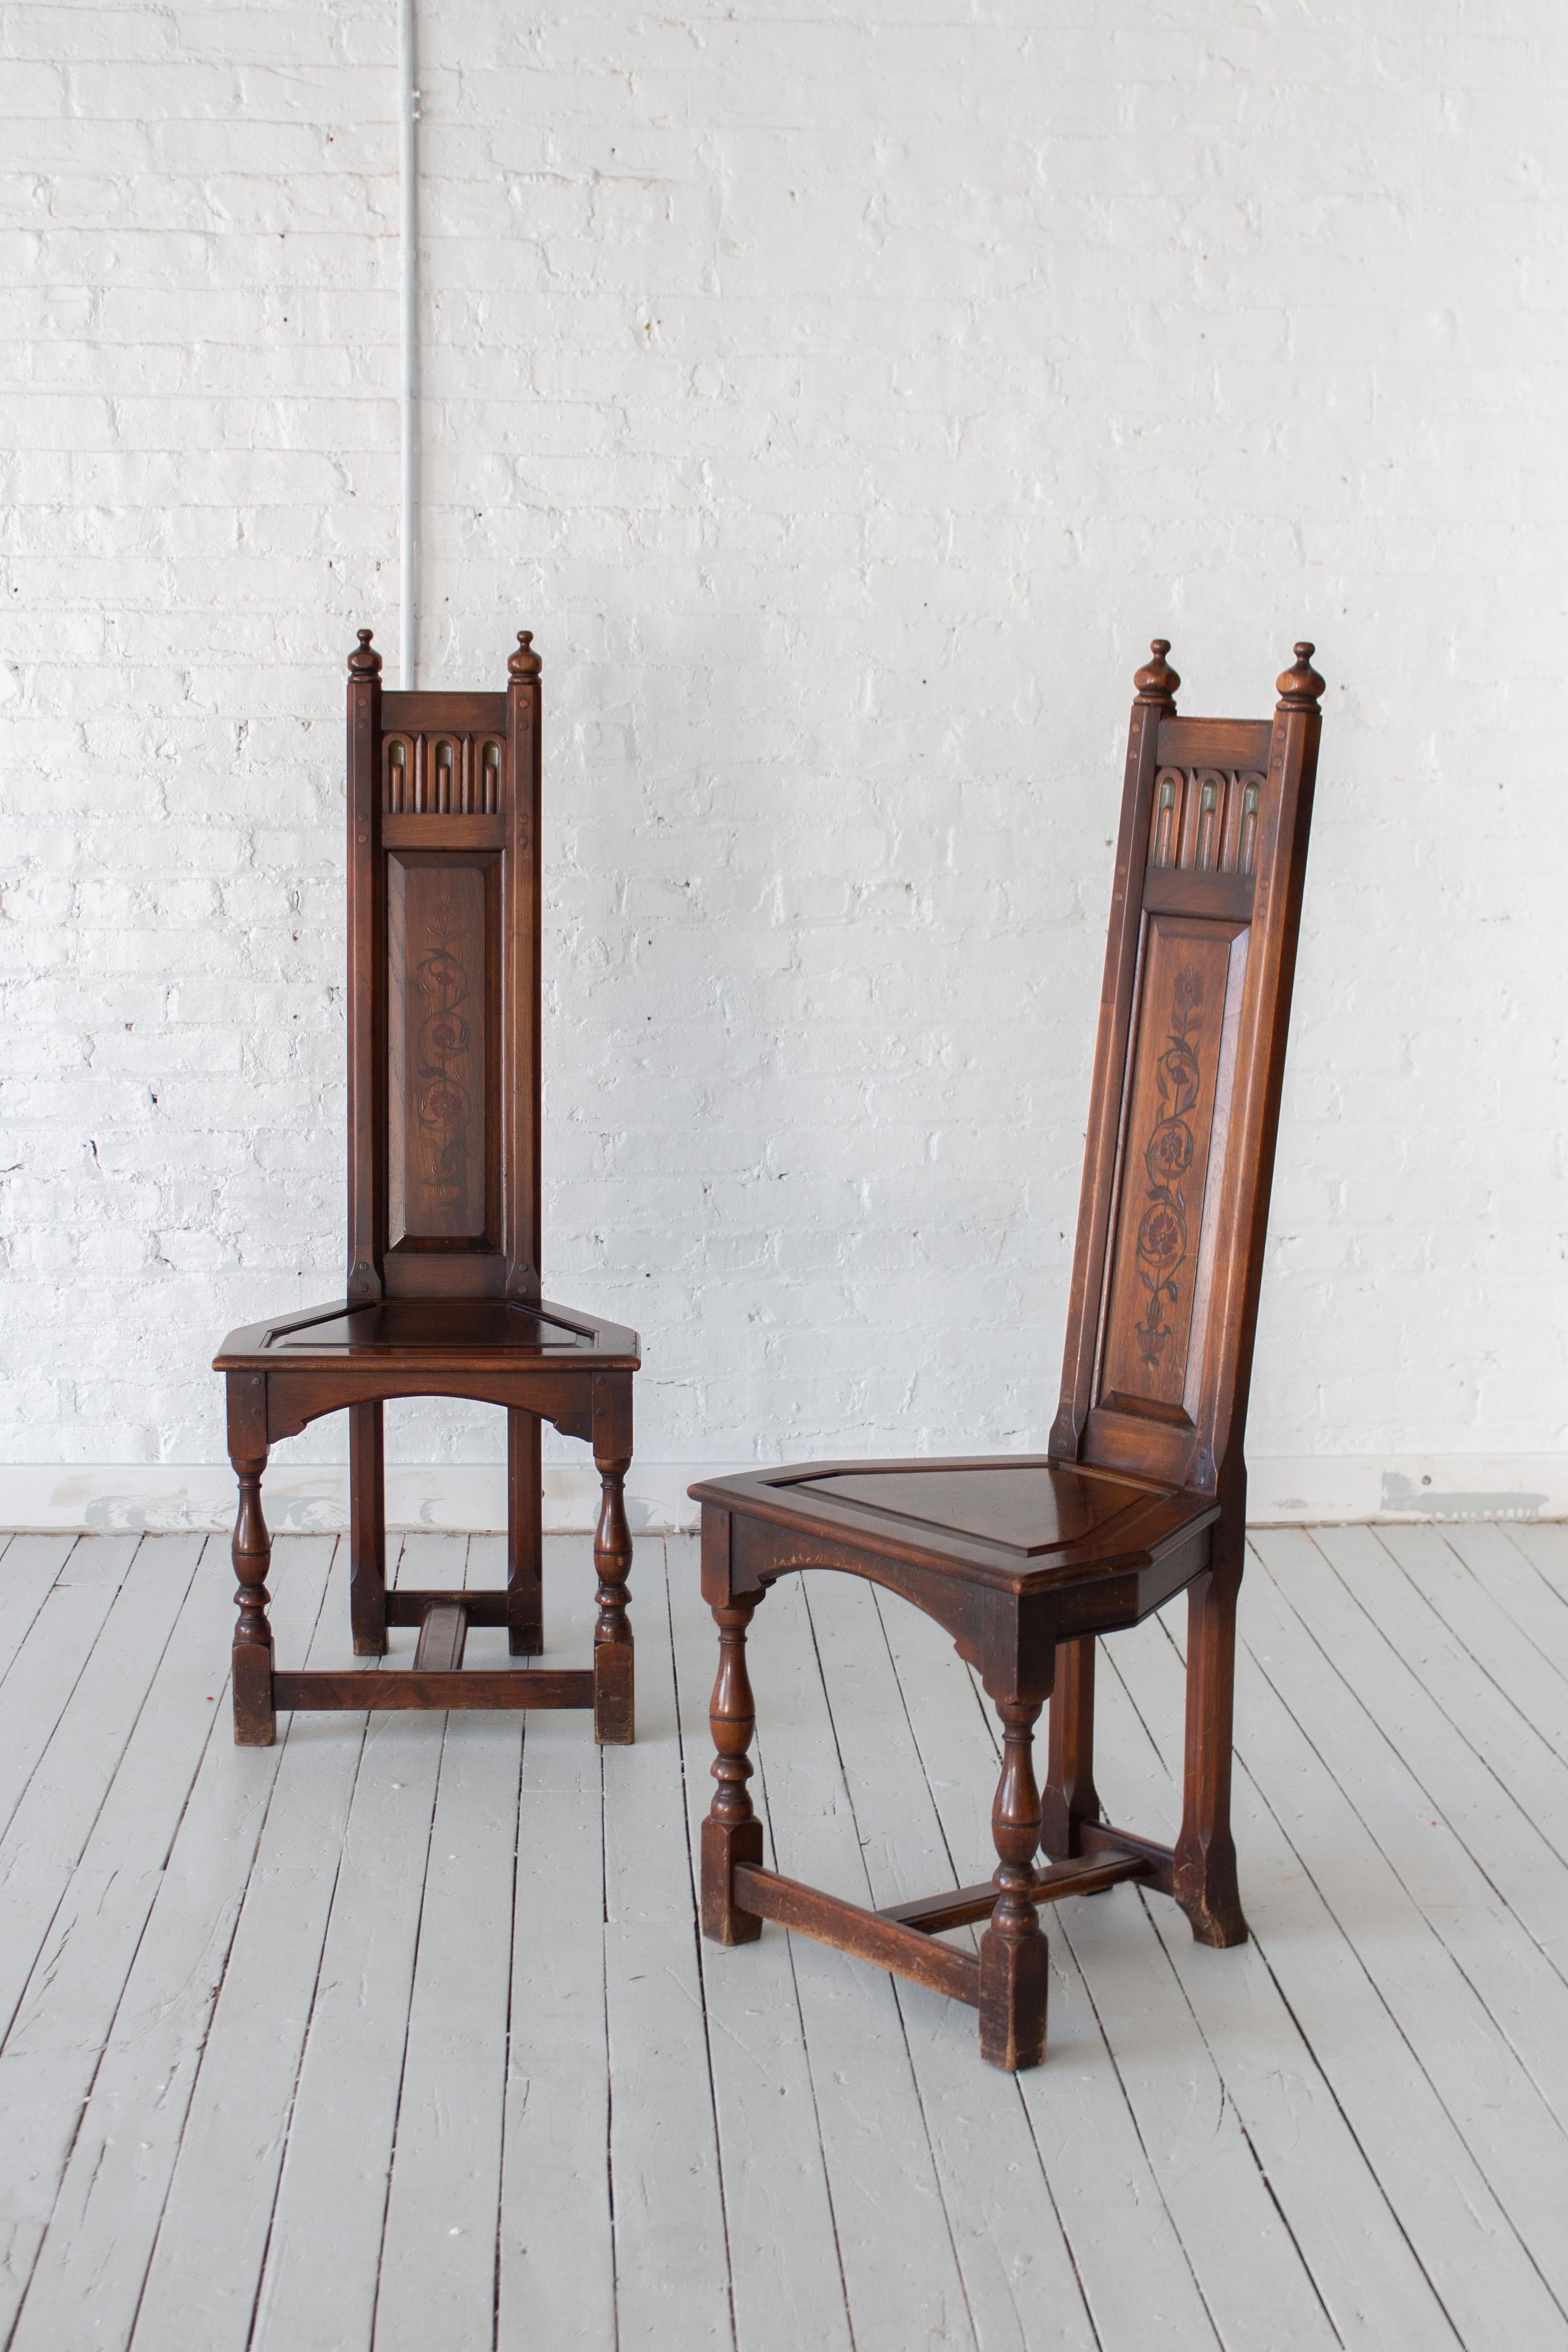 A pair of gothic revival altar chairs by Kittinger Furniture. Slender wood backs with polychrome detail. Trapezoidal seats and turned wood legs. Rich patina to wood throughout. Marked “Kittinger.”